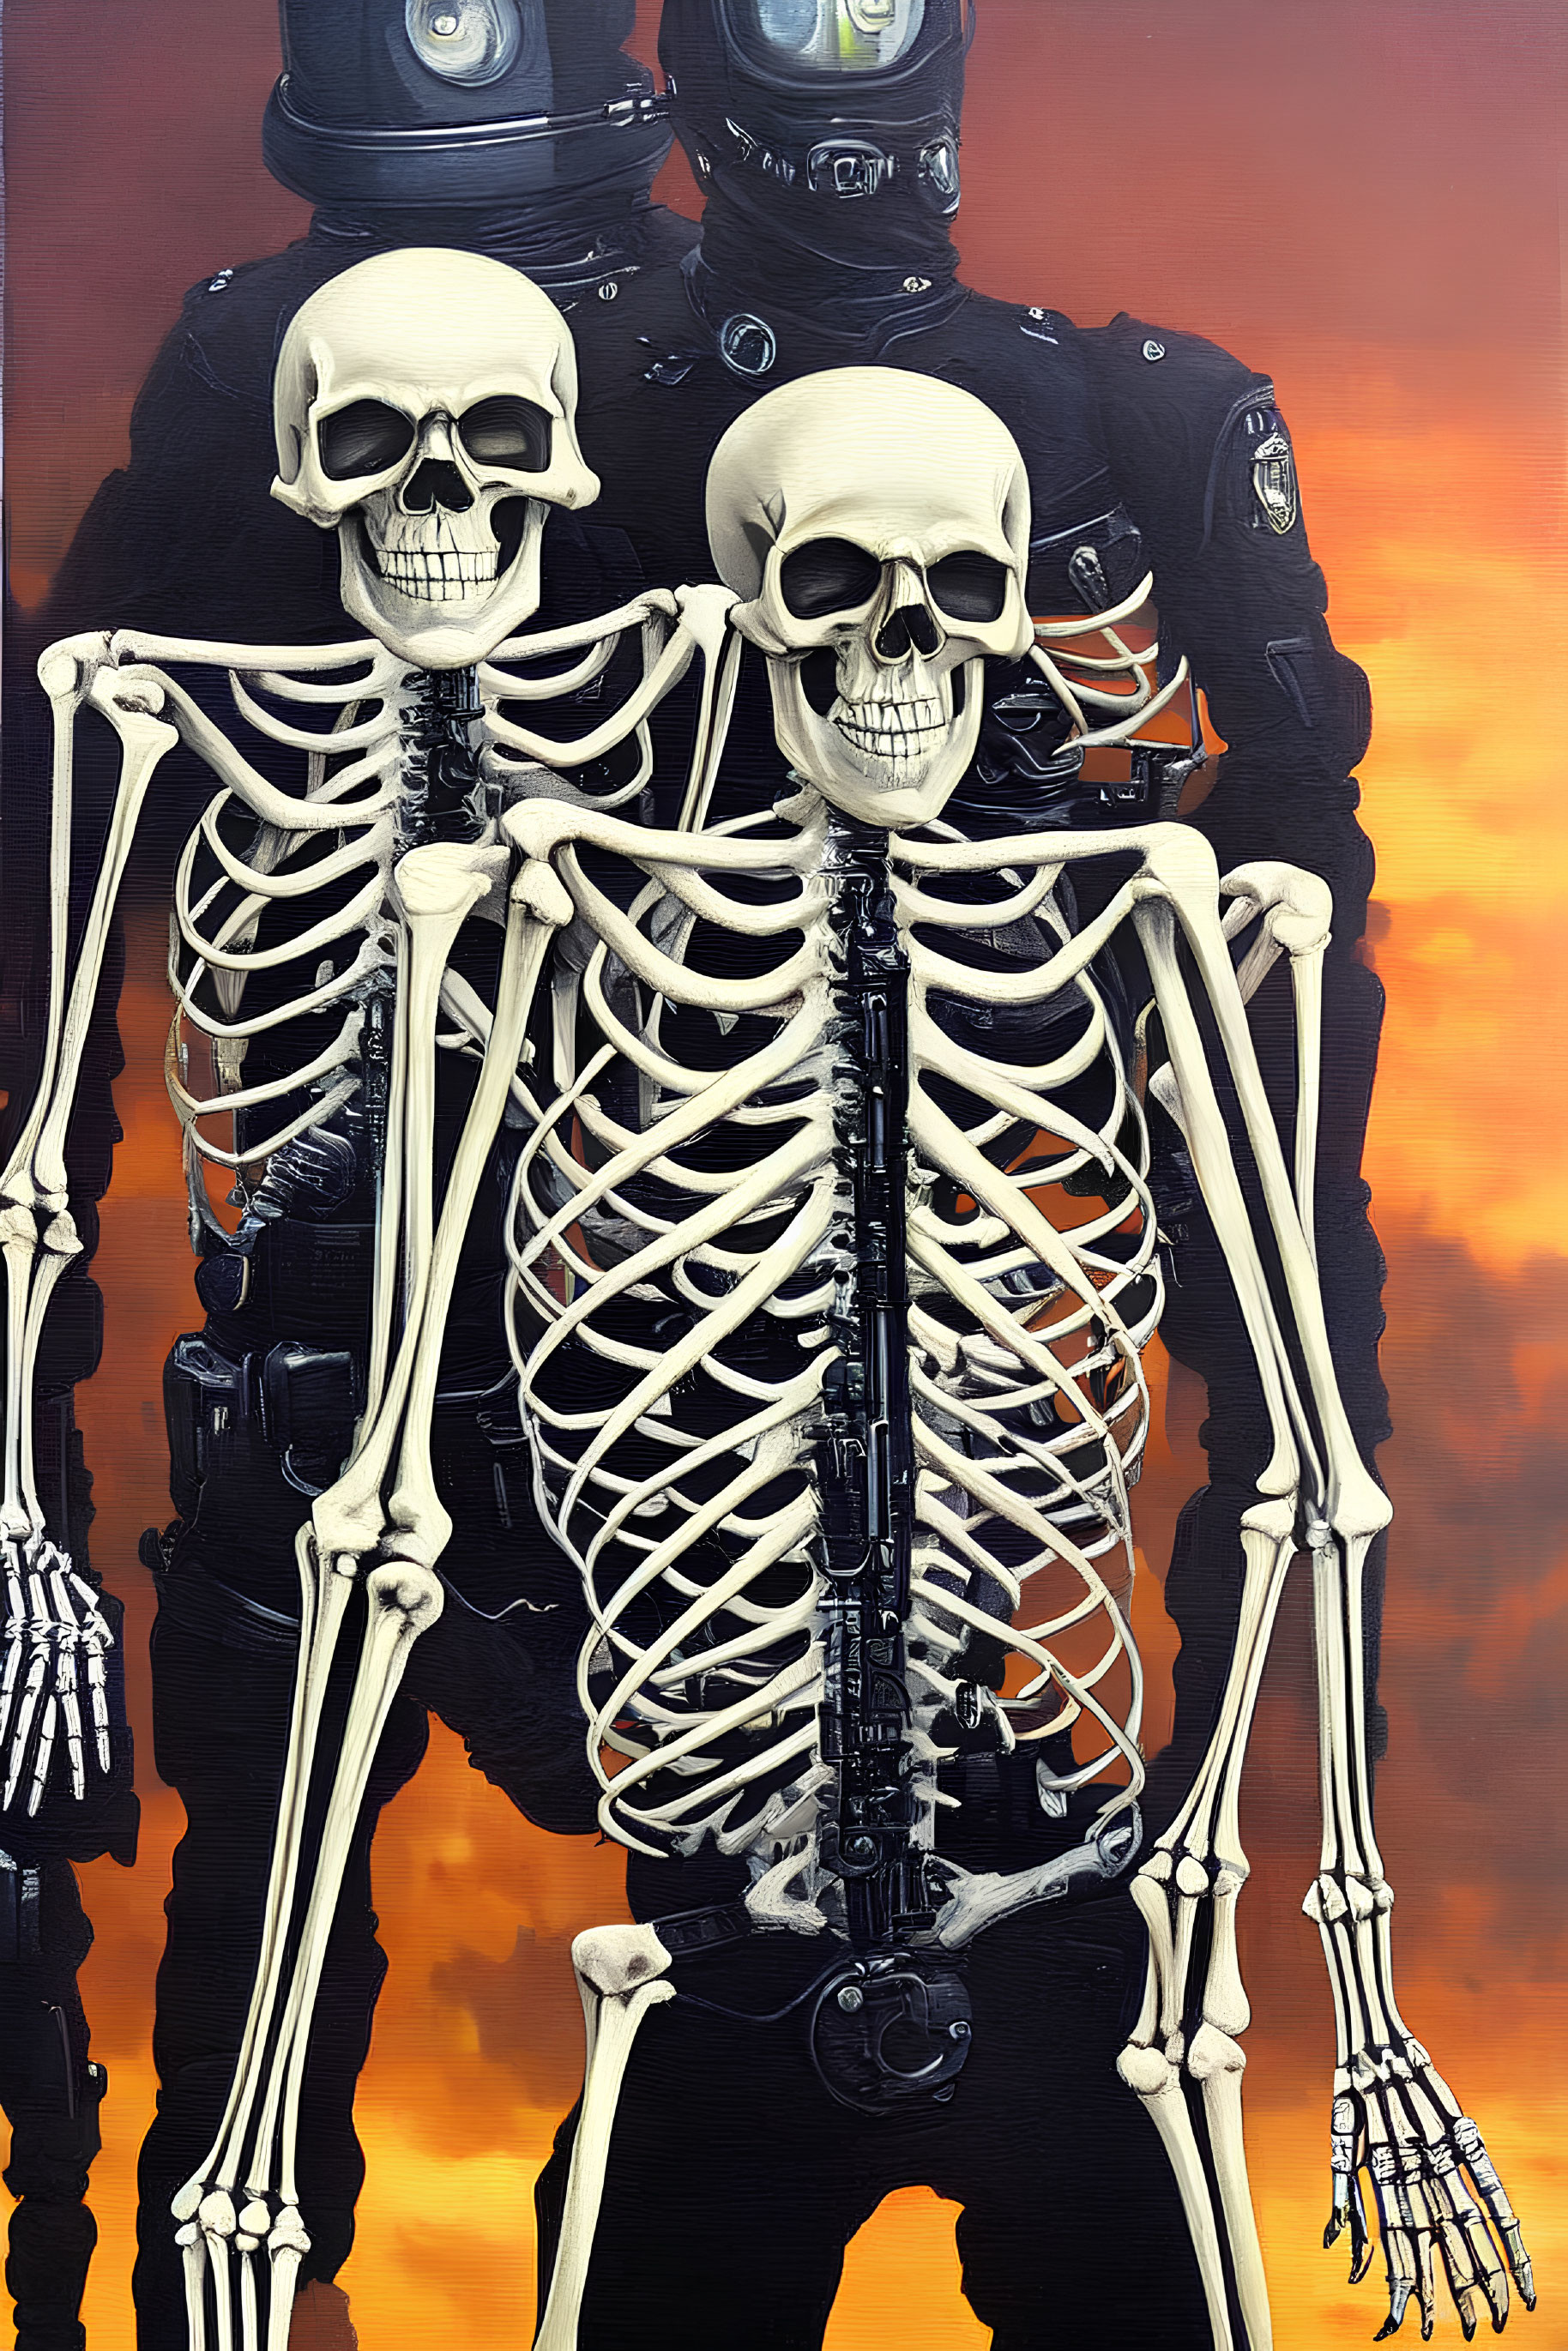 Skeleton Figures with Police Hats and Badges on Orange Red Gradient Background